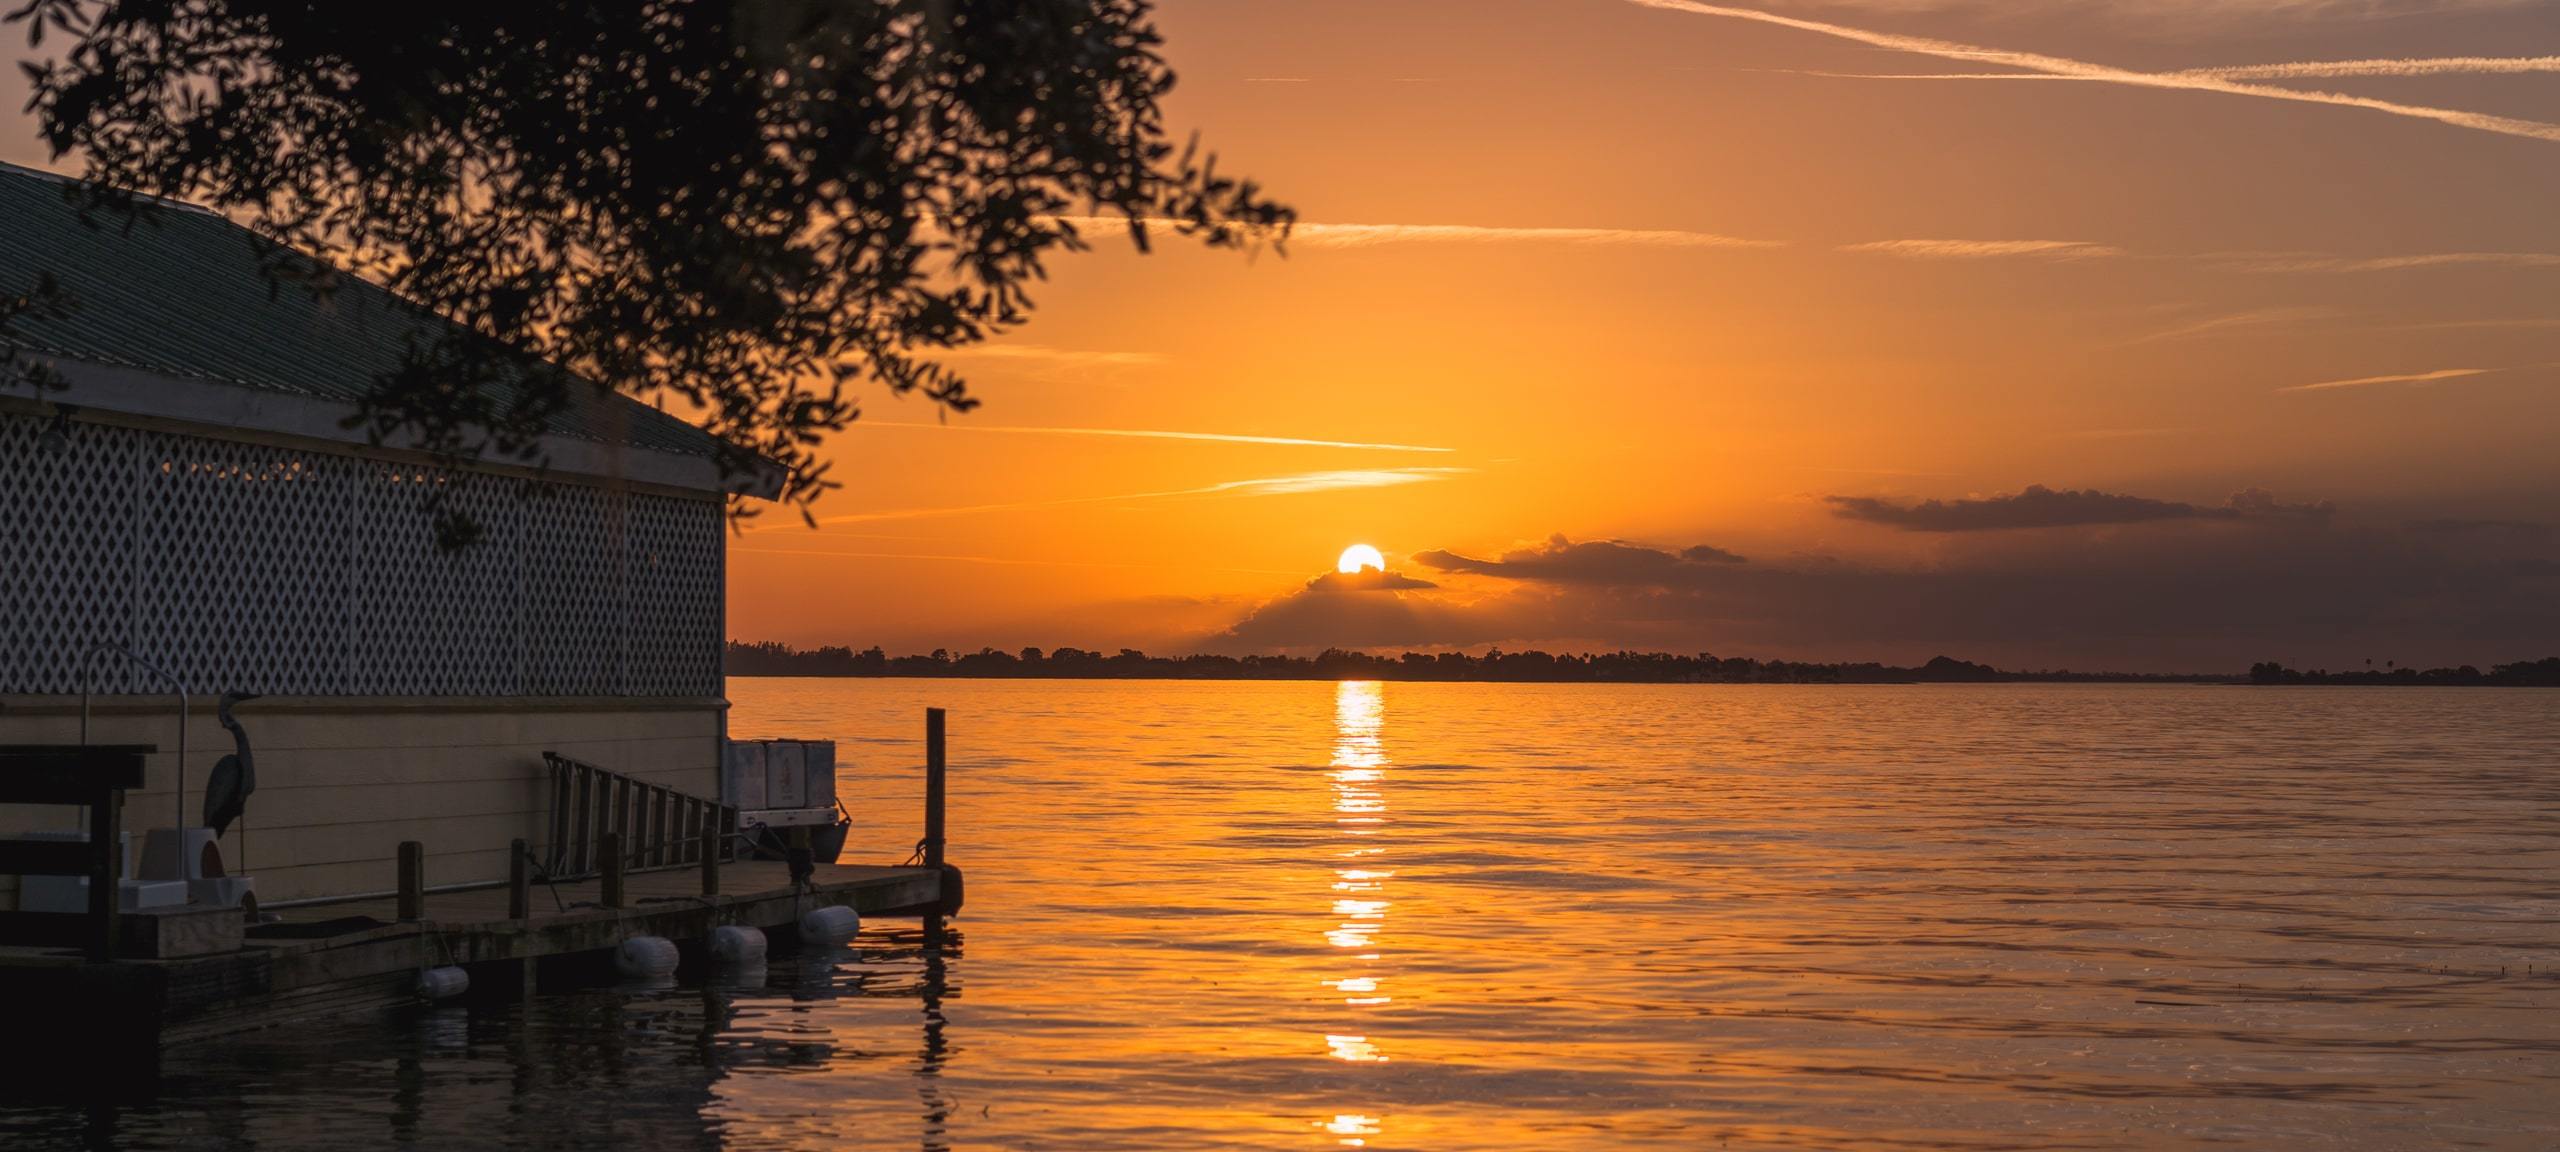 Sunset over Lake Dora with a Mount Dora private dock and boat house on far left